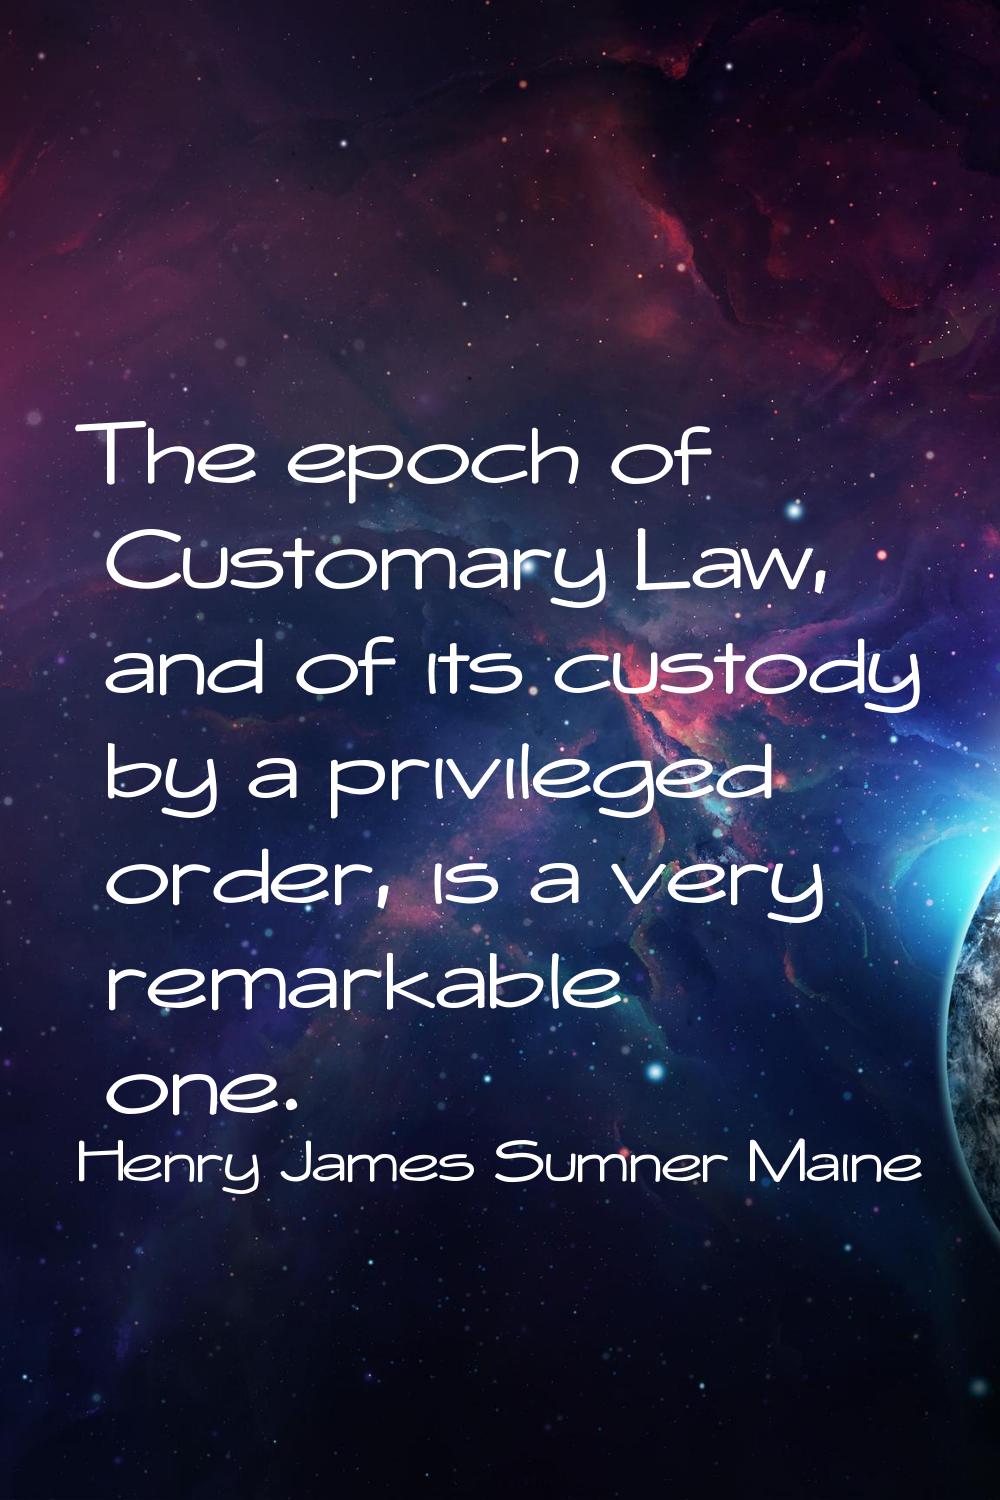 The epoch of Customary Law, and of its custody by a privileged order, is a very remarkable one.